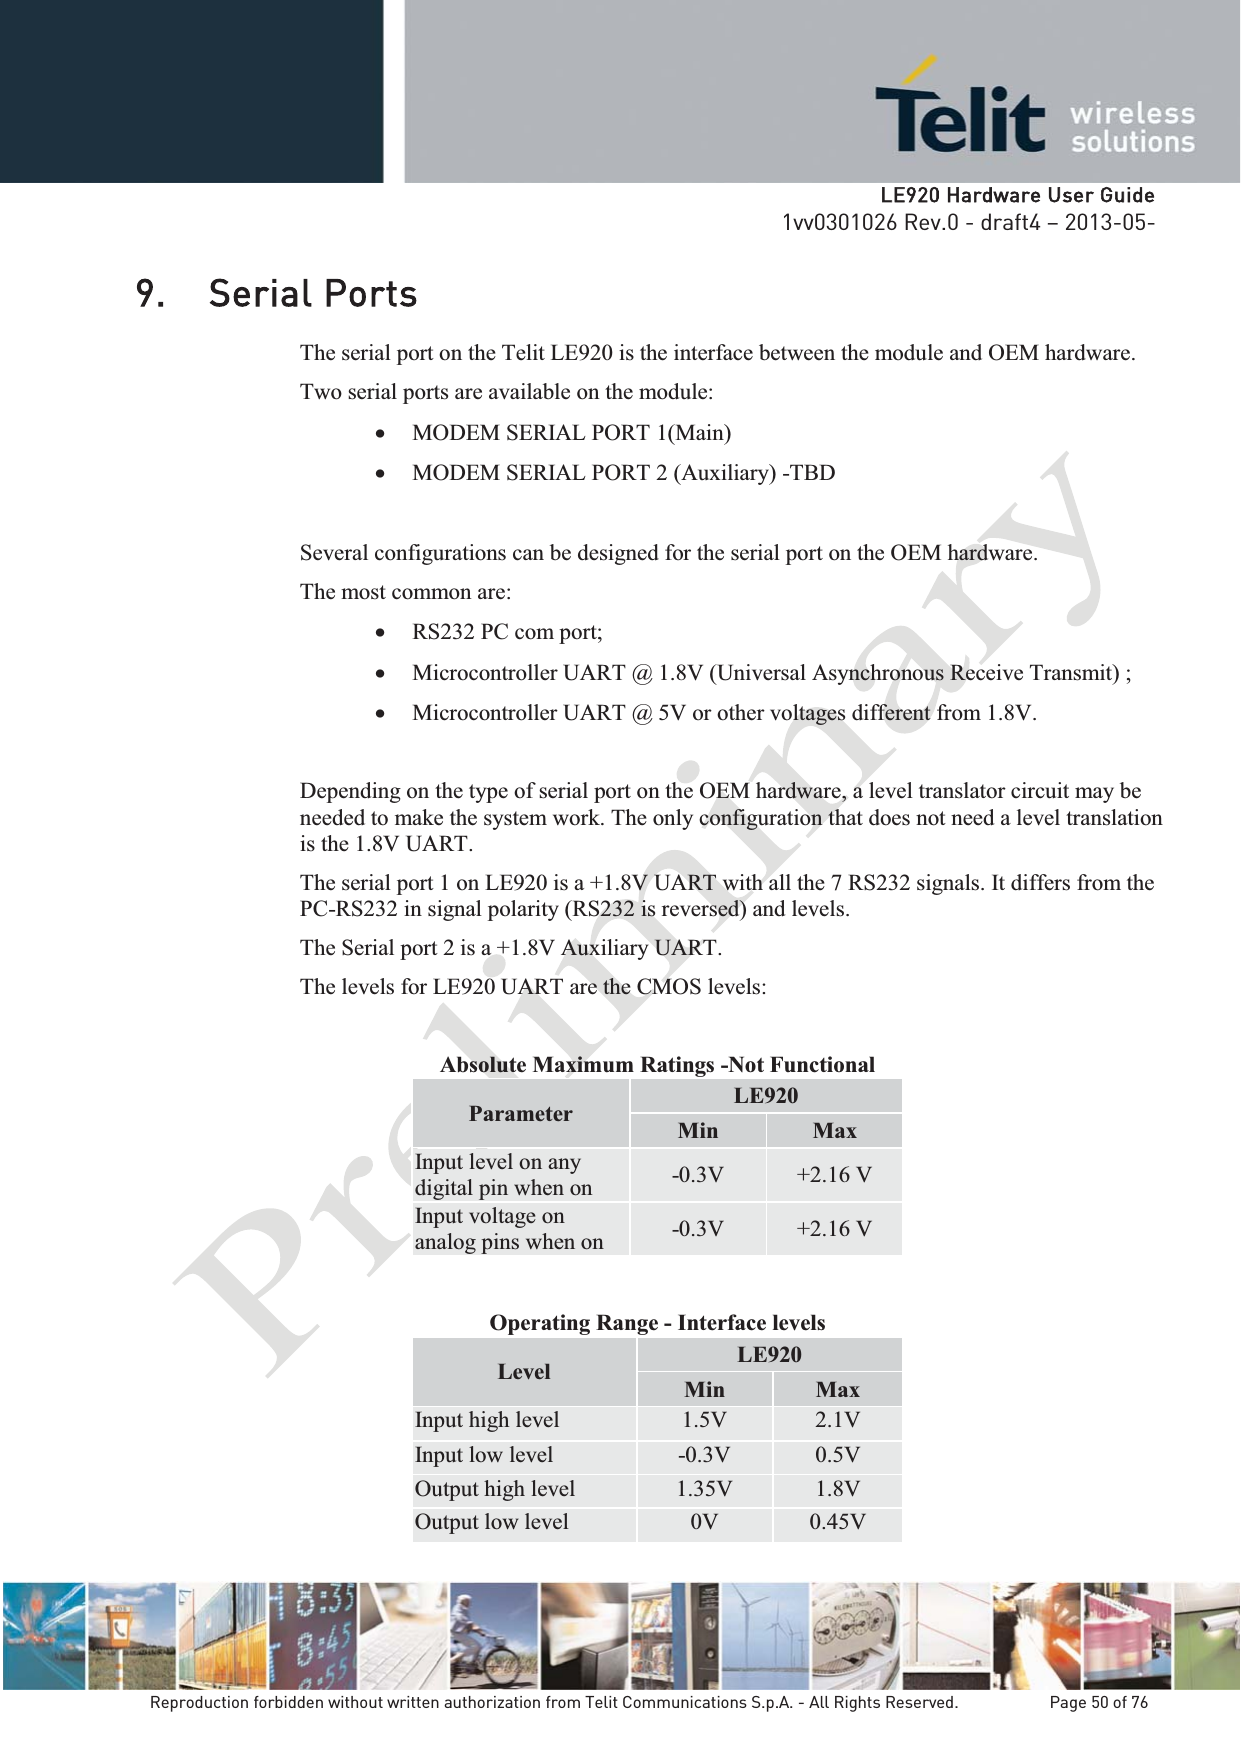   LLE920 Hardware User Guide1vv0301026 Rev.0 - draft4 – 2013-05-Reproduction forbidden without written authorization from Telit Communications S.p.A. - All Rights Reserved.    Page 50 of 76 9. Serial Ports The serial port on the Telit LE920 is the interface between the module and OEM hardware.  Two serial ports are available on the module: x MODEM SERIAL PORT 1(Main) x MODEM SERIAL PORT 2 (Auxiliary) -TBD  Several configurations can be designed for the serial port on the OEM hardware.  The most common are: x RS232 PC com port; x Microcontroller UART @ 1.8V (Universal Asynchronous Receive Transmit) ; x Microcontroller UART @ 5V or other voltages different from 1.8V.  Depending on the type of serial port on the OEM hardware, a level translator circuit may be needed to make the system work. The only configuration that does not need a level translation is the 1.8V UART. The serial port 1 on LE920 is a +1.8V UART with all the 7 RS232 signals. It differs from the PC-RS232 in signal polarity (RS232 is reversed) and levels. The Serial port 2 is a +1.8V Auxiliary UART. The levels for LE920 UART are the CMOS levels:  Absolute Maximum Ratings -Not Functional Parameter  LE920 Min Max Input level on any digital pin when on  -0.3V  +2.16 V Input voltage on analog pins when on  -0.3V  +2.16 V   Operating Range - Interface levels Level  LE920 Min  Max Input high level  1.5V  2.1V Input low level  -0.3V 0.5V Output high level  1.35V  1.8V Output low level  0V  0.45V 